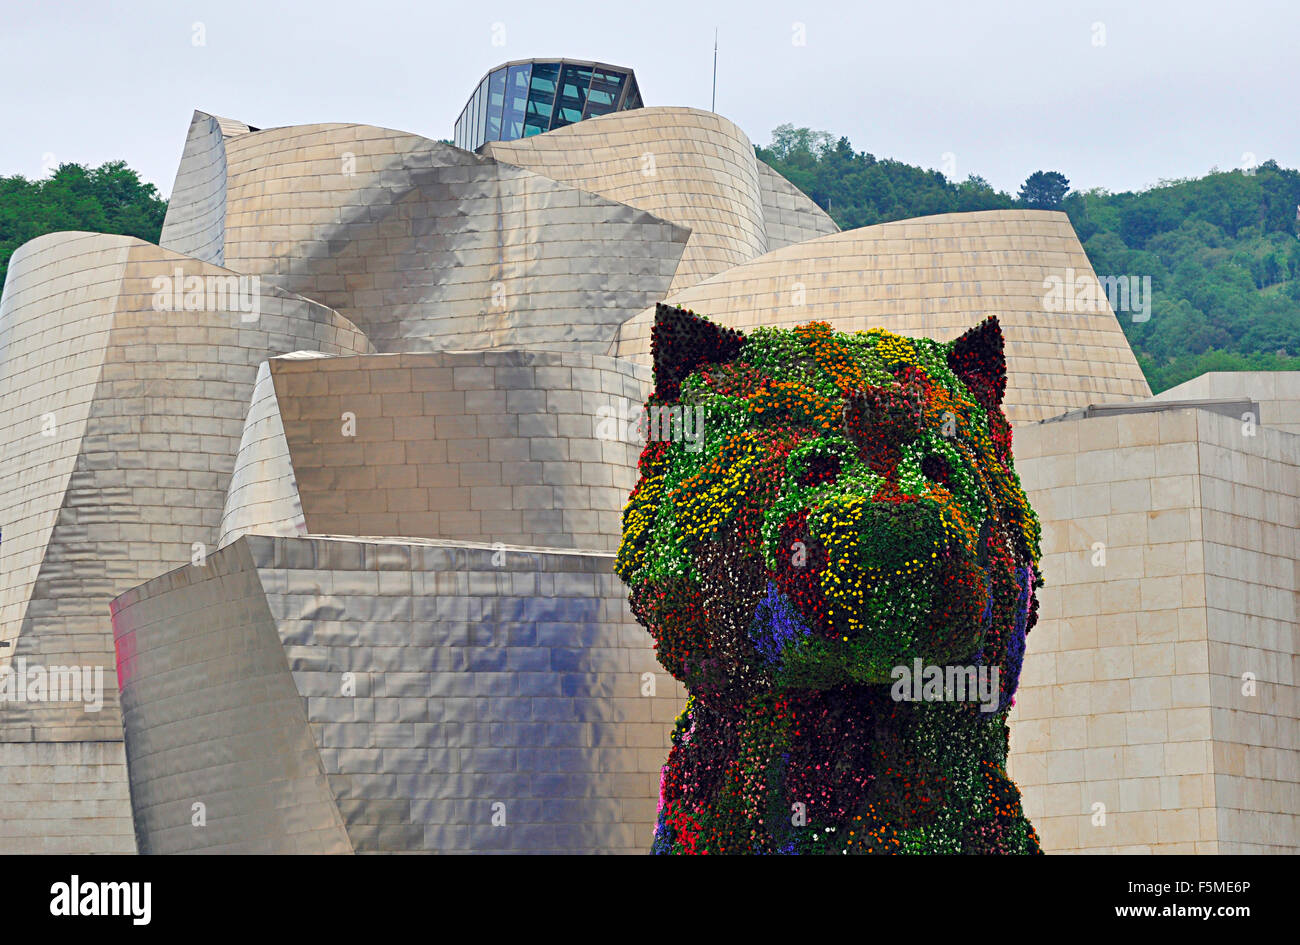 Puppy, sculpture by Jeff Koons in front of Guggenheim Museum, Bilbao, Basque Country, Spain Stock Photo